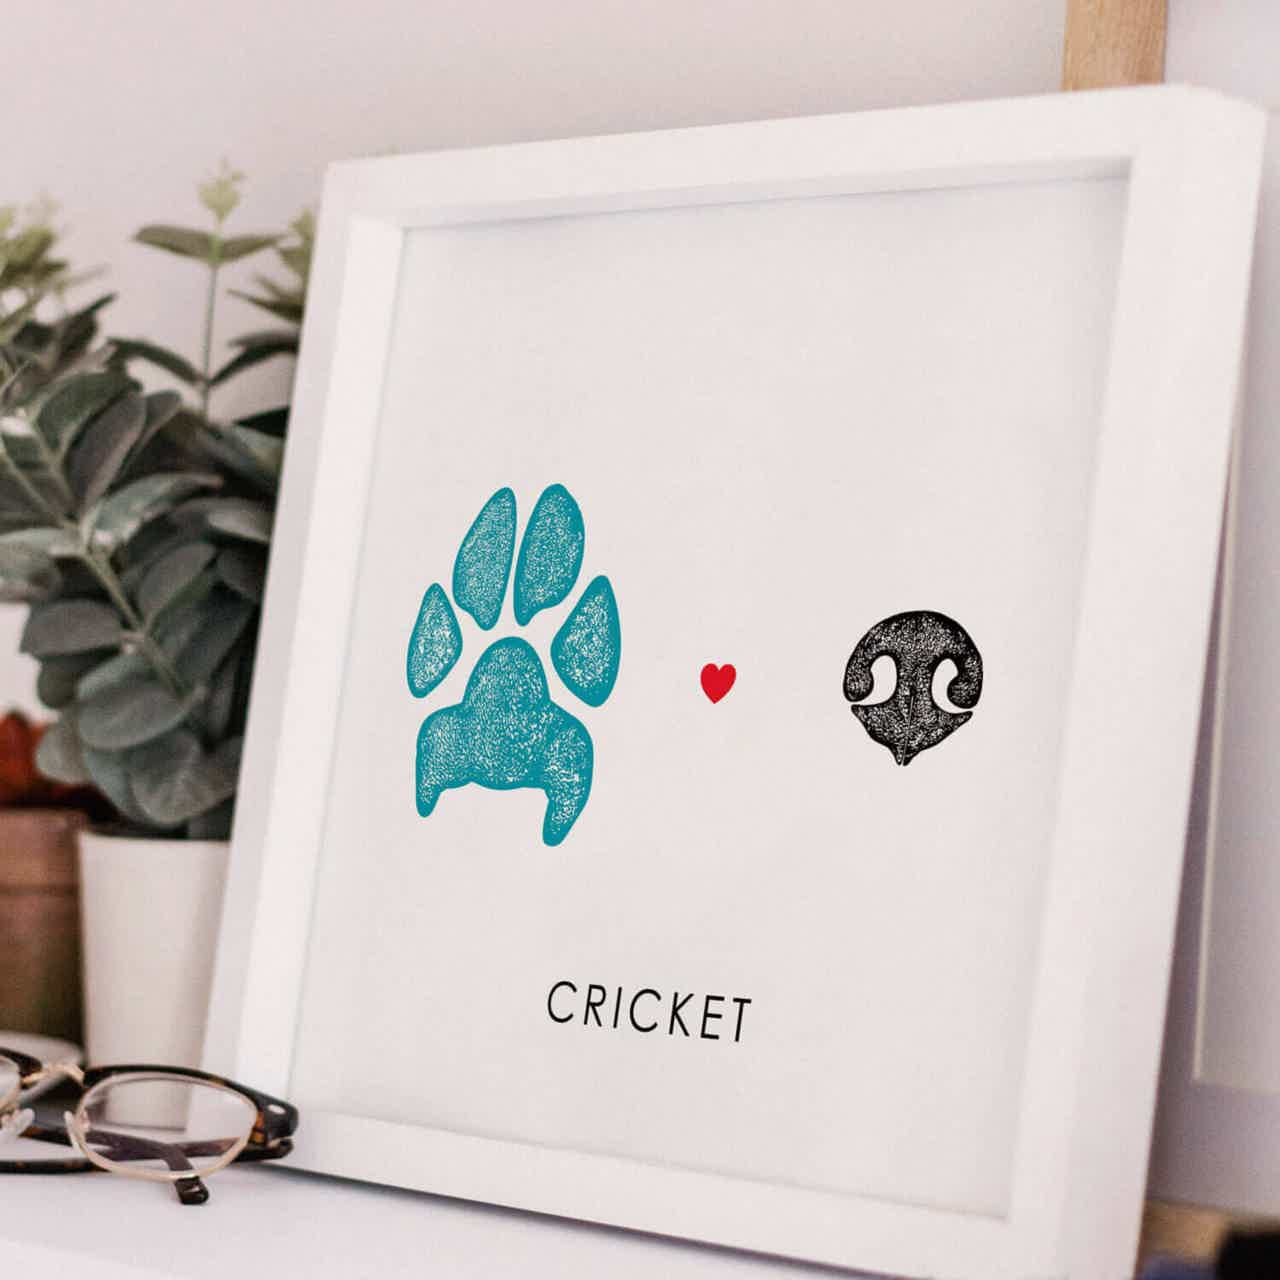 Dog Paw and nose print on display in white frame